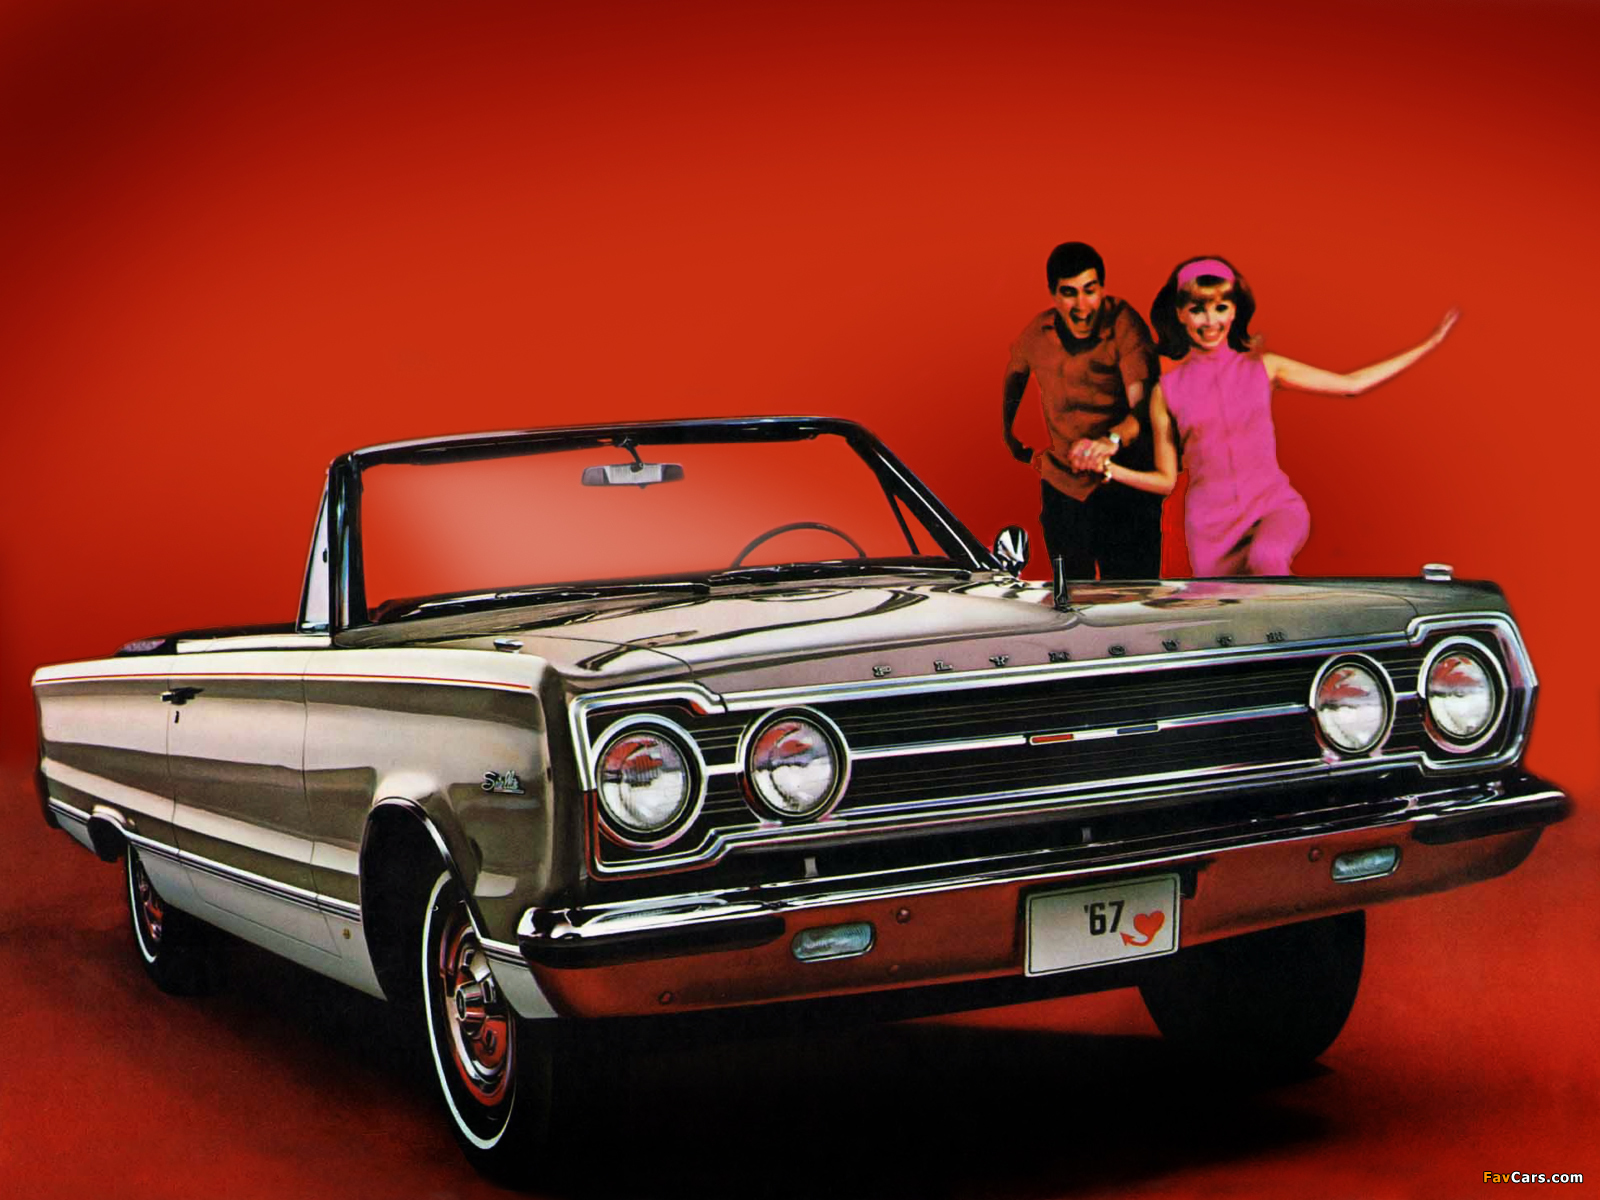 1967 Plymouth Belvedere Wallpapers